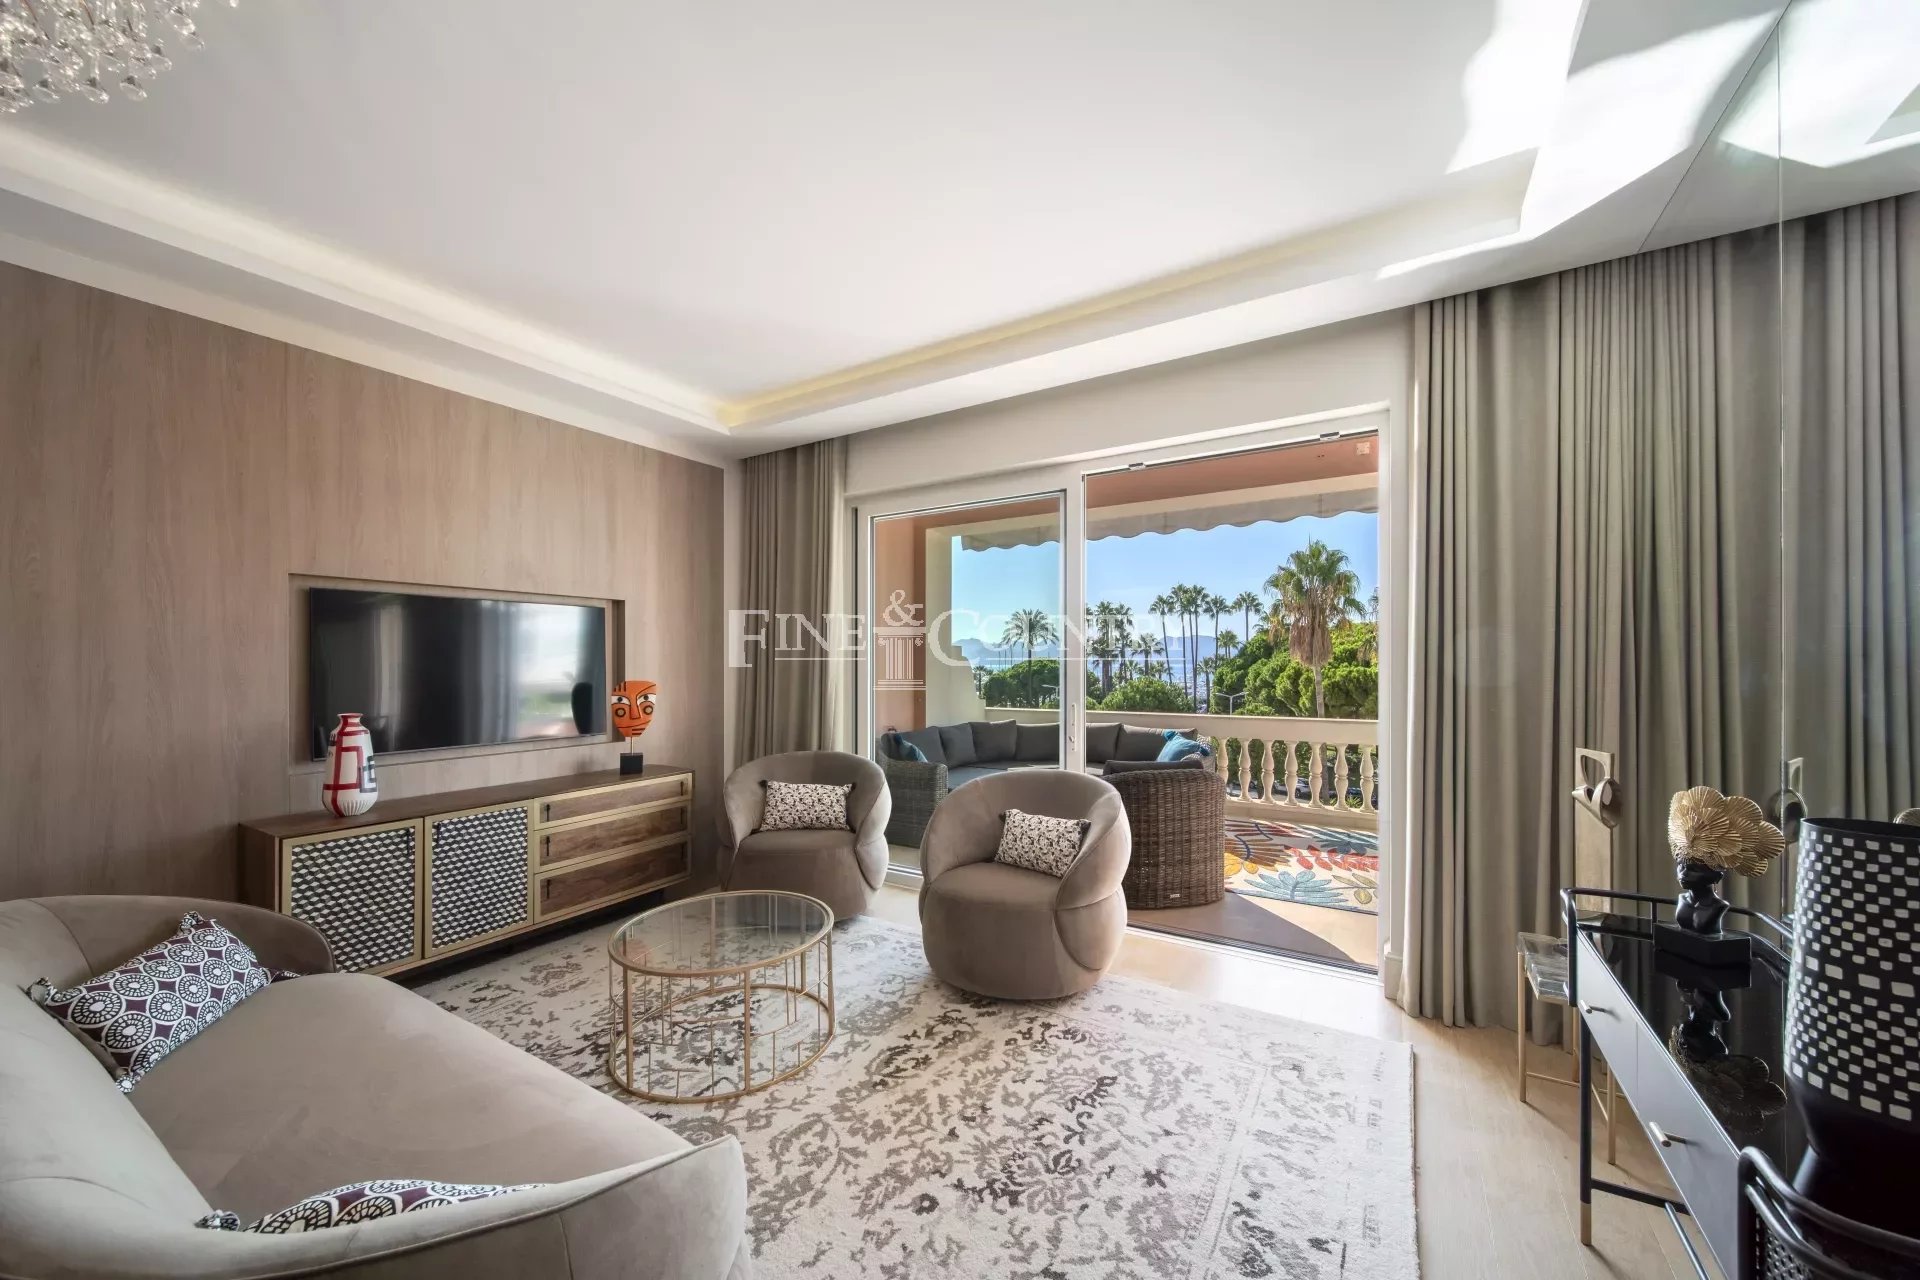 Apartment For Sale in Cannes, La Croisette Accommodation in Cannes